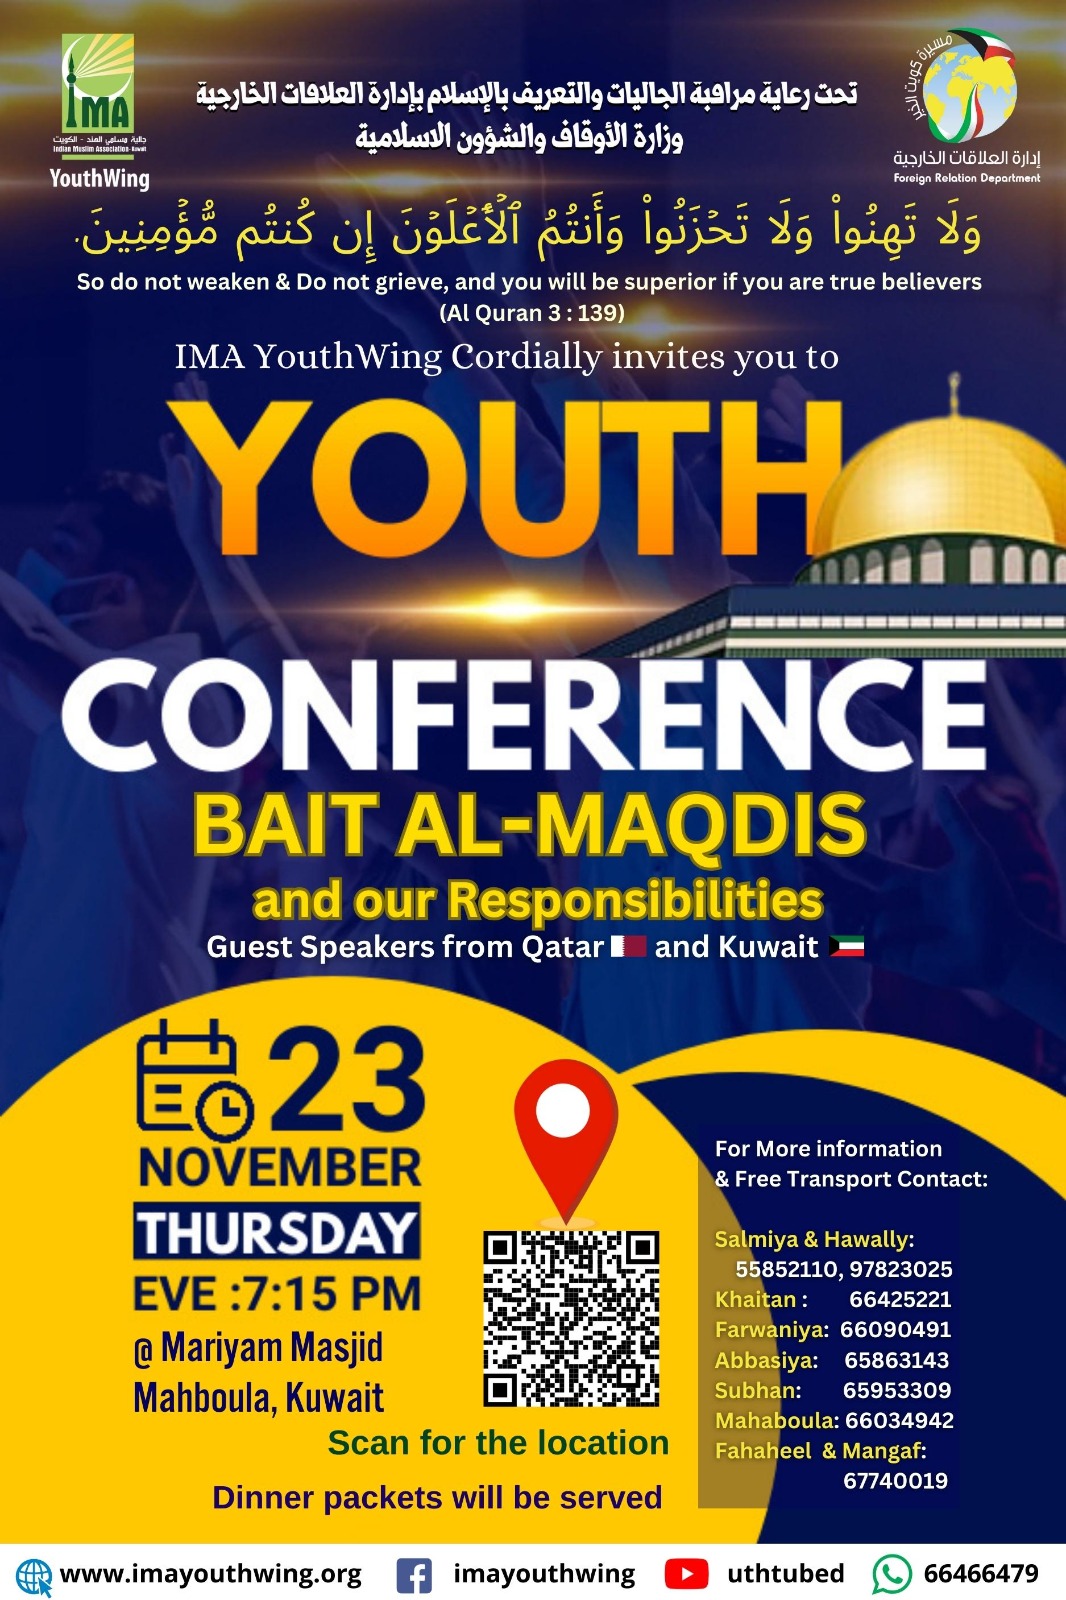 Youth Conference